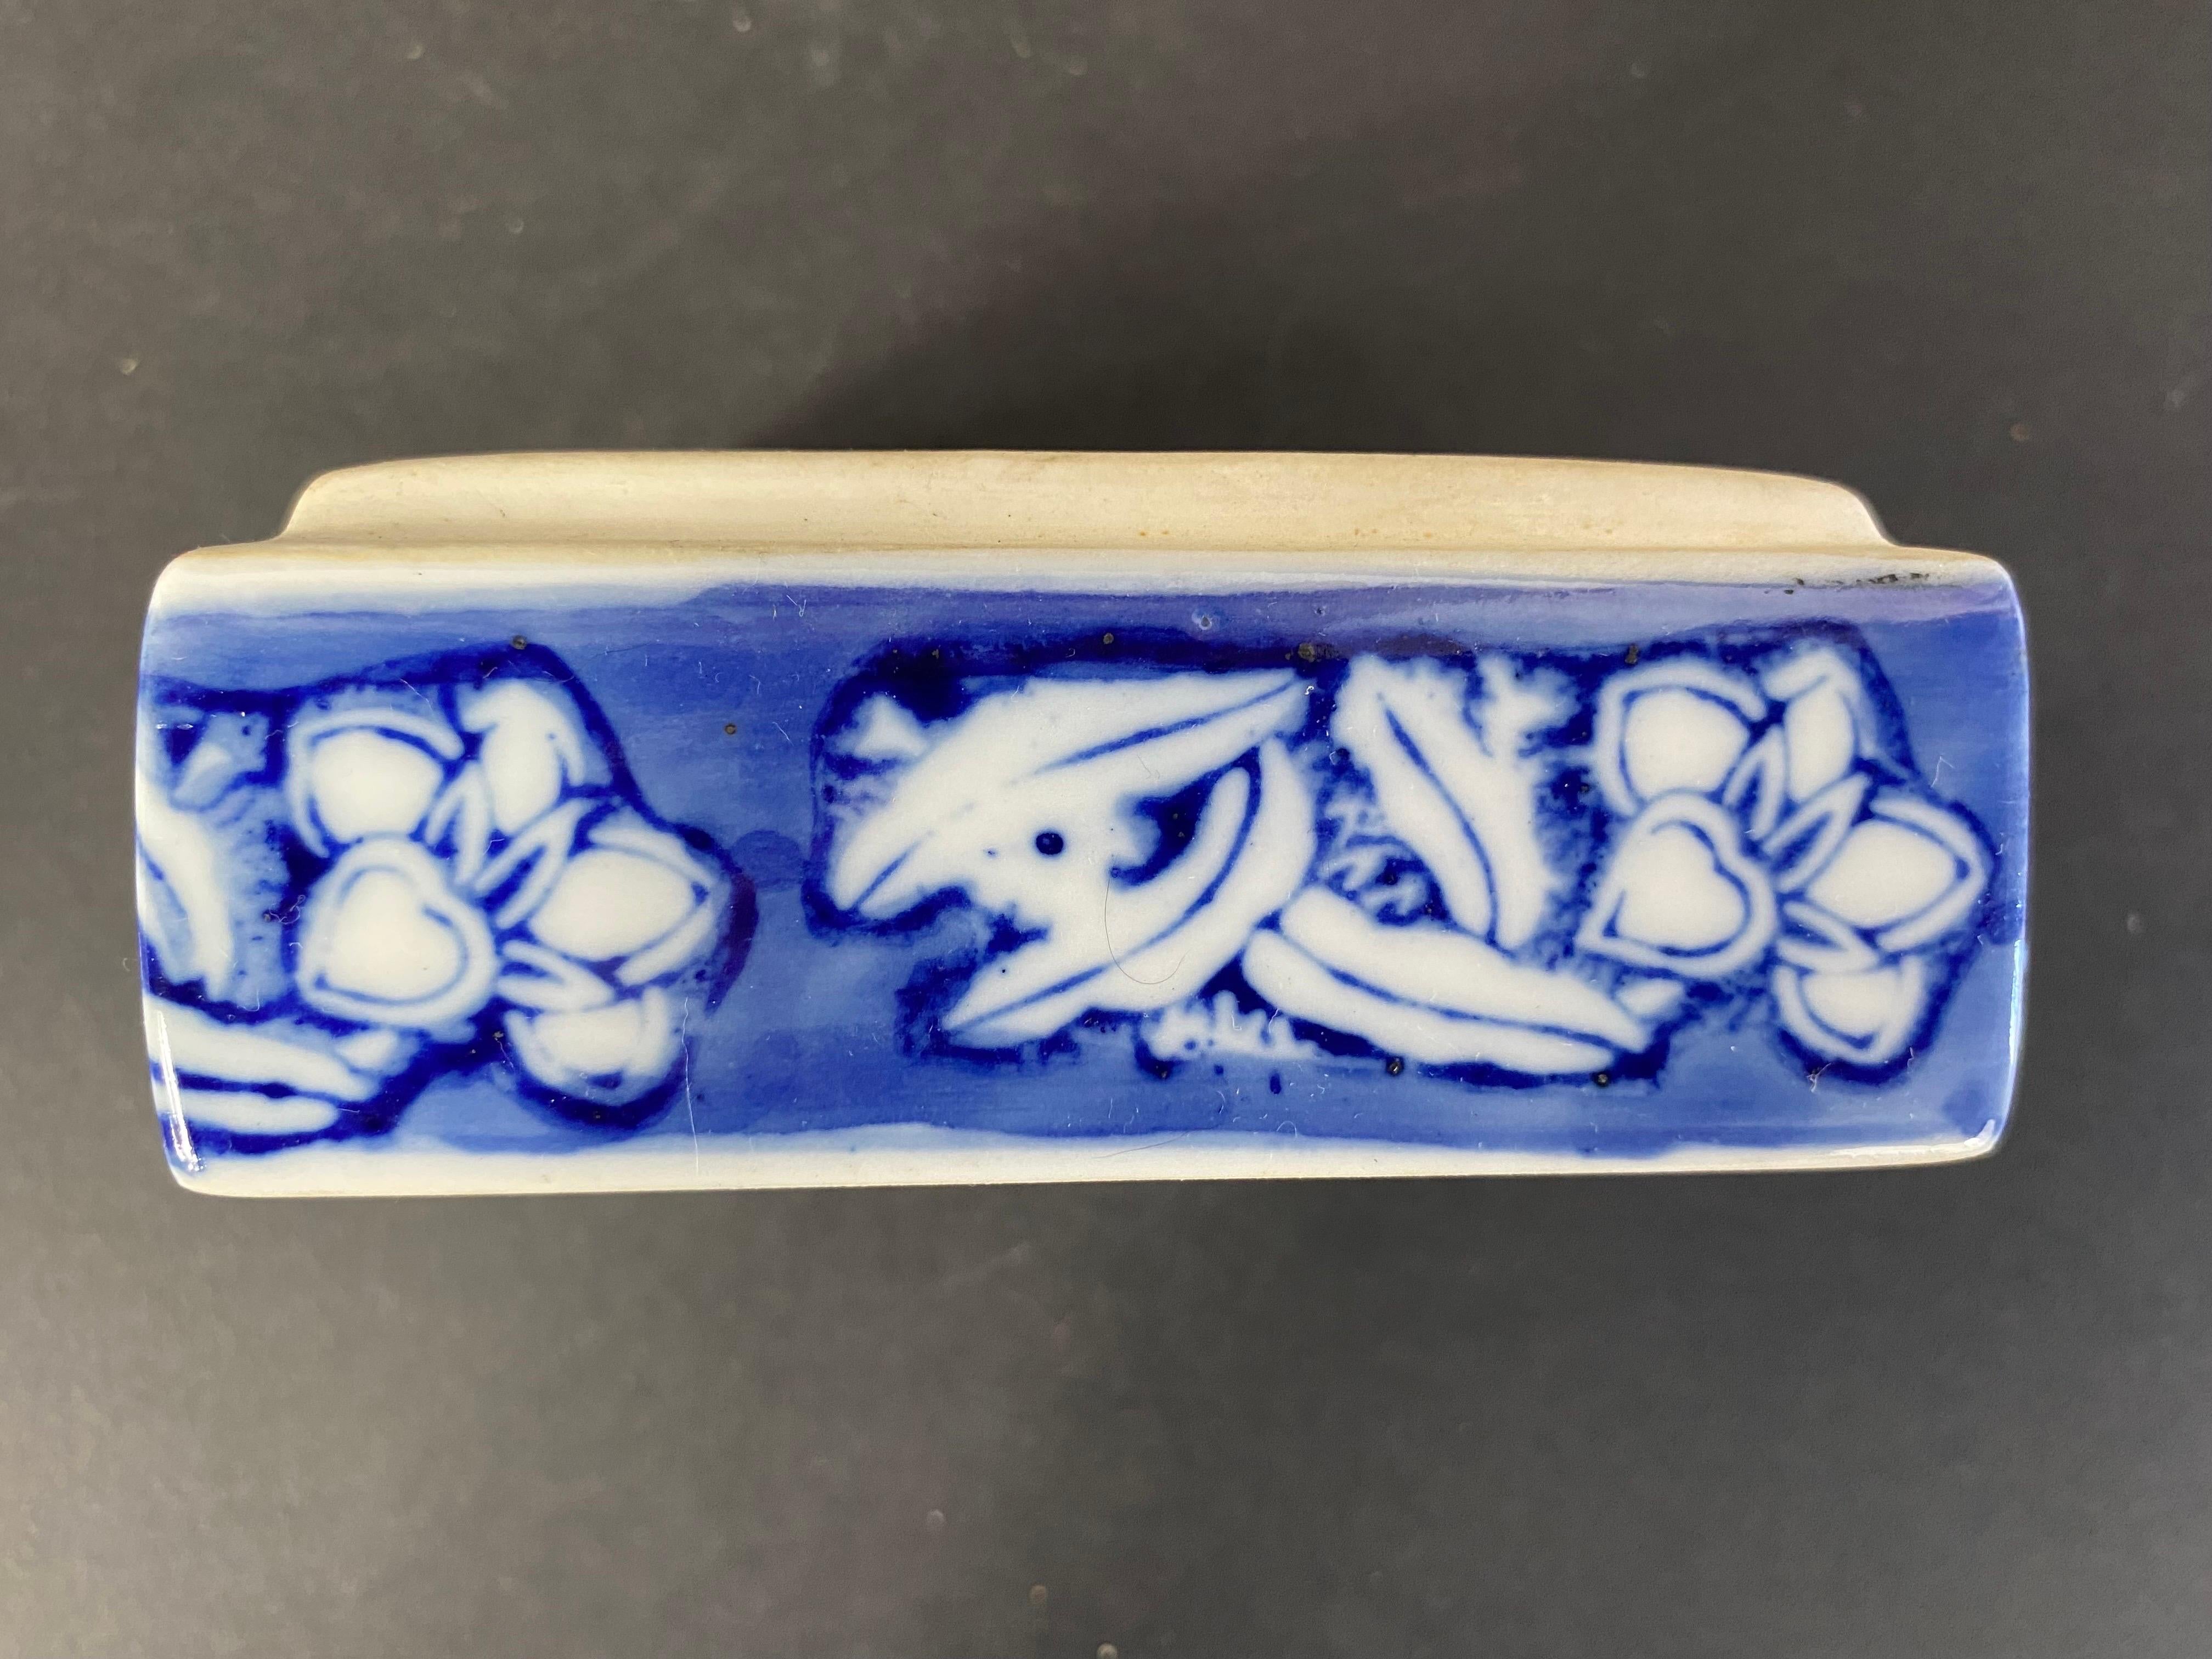 Blue and White Porcelain Ink Writing Jewerly Box - China 1900 Asian art XXth For Sale 3